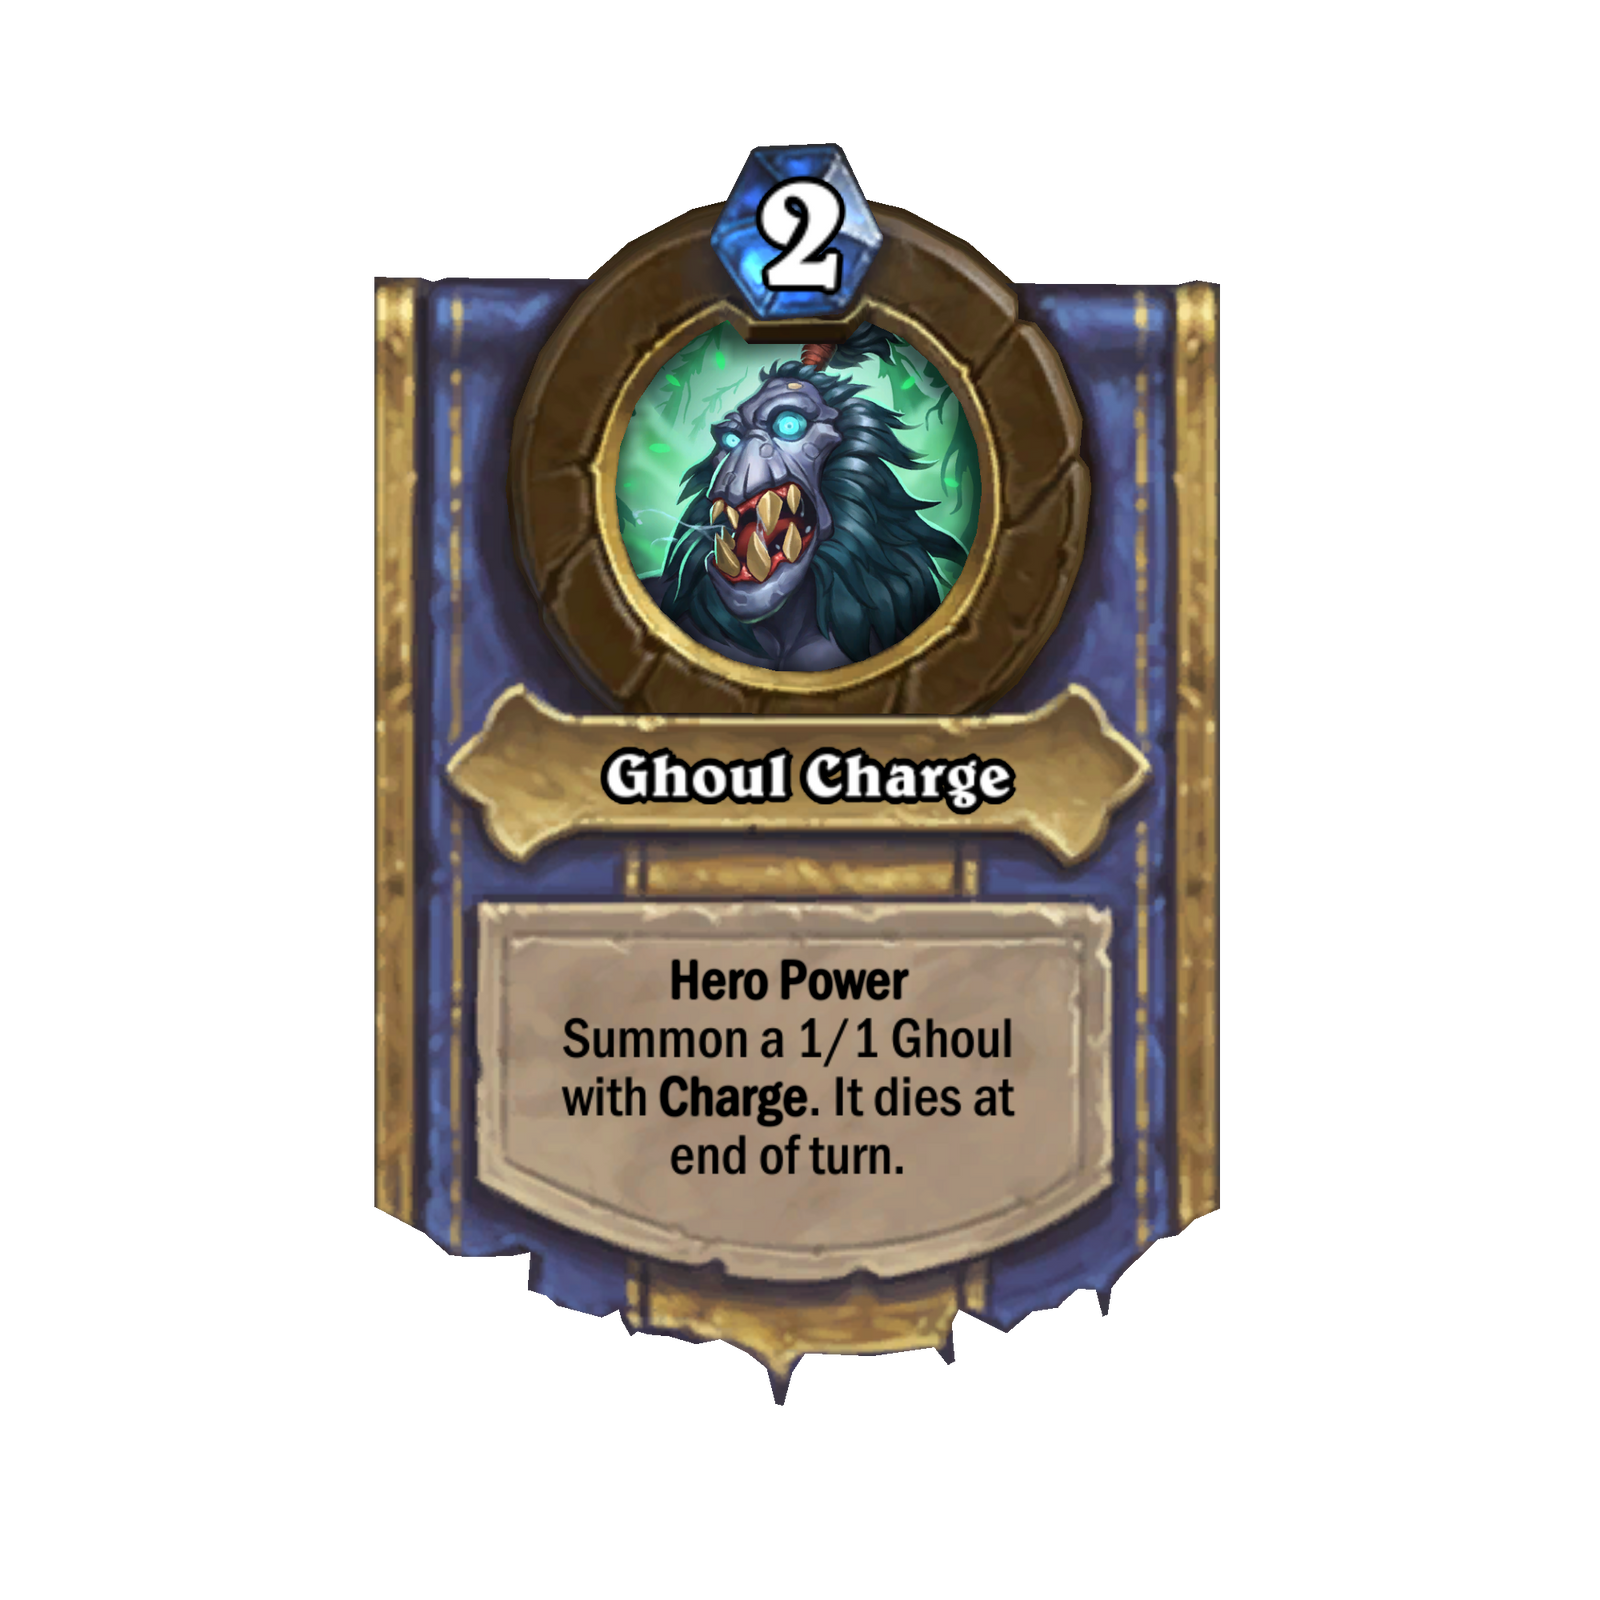 Death Knight's Ghoul Charge ability in Hearthstone